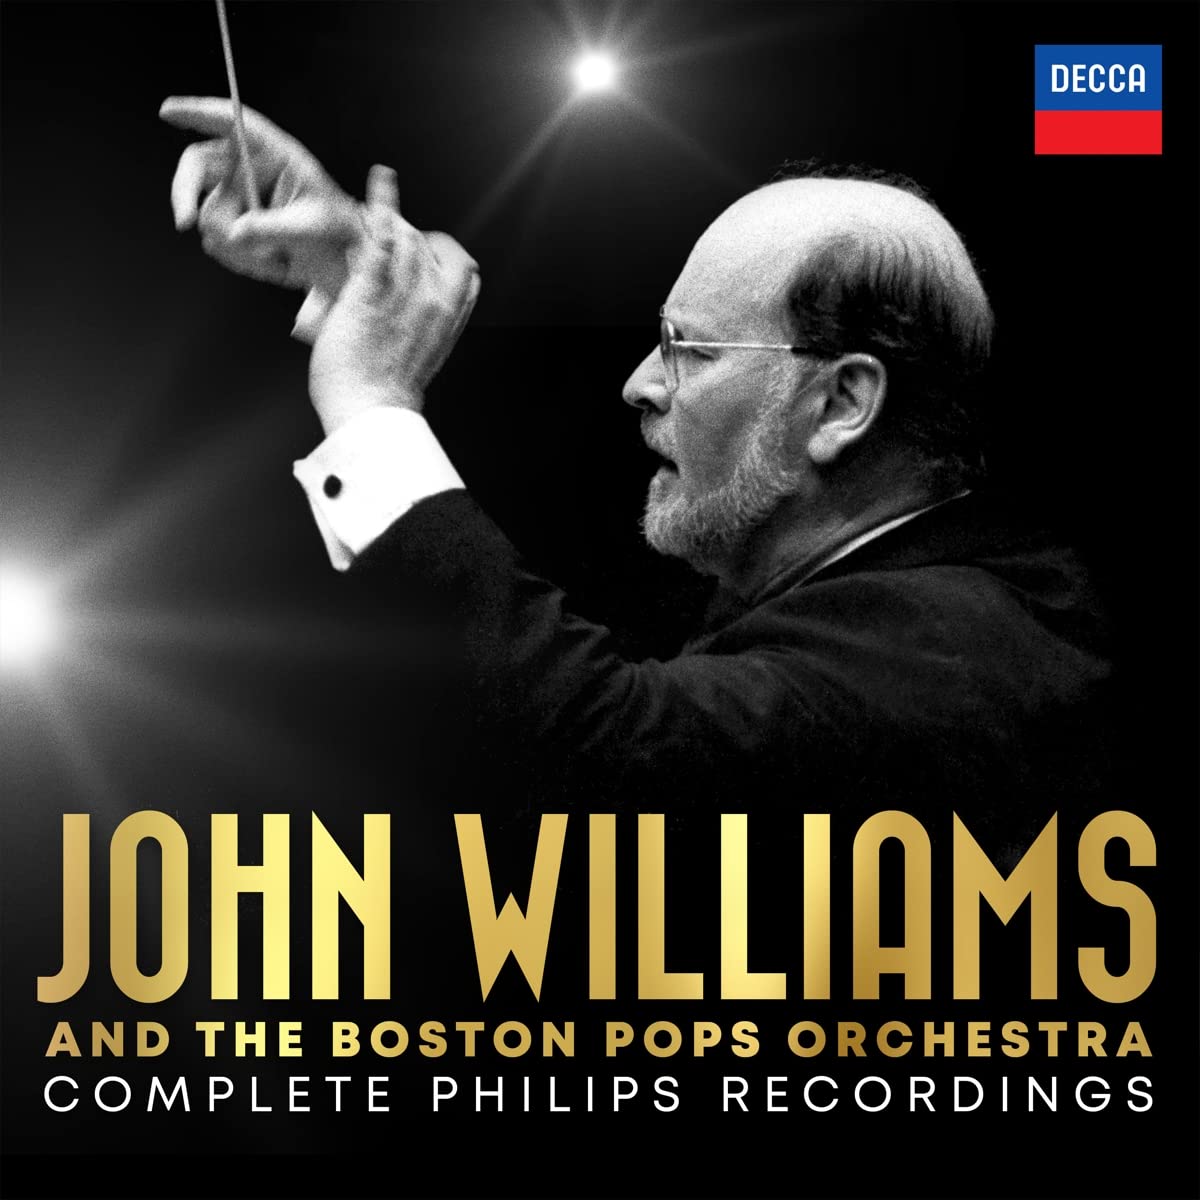 JOHN WILLIAMS AND THE BOSTON POPS ORCHESTRA The Light Music Society